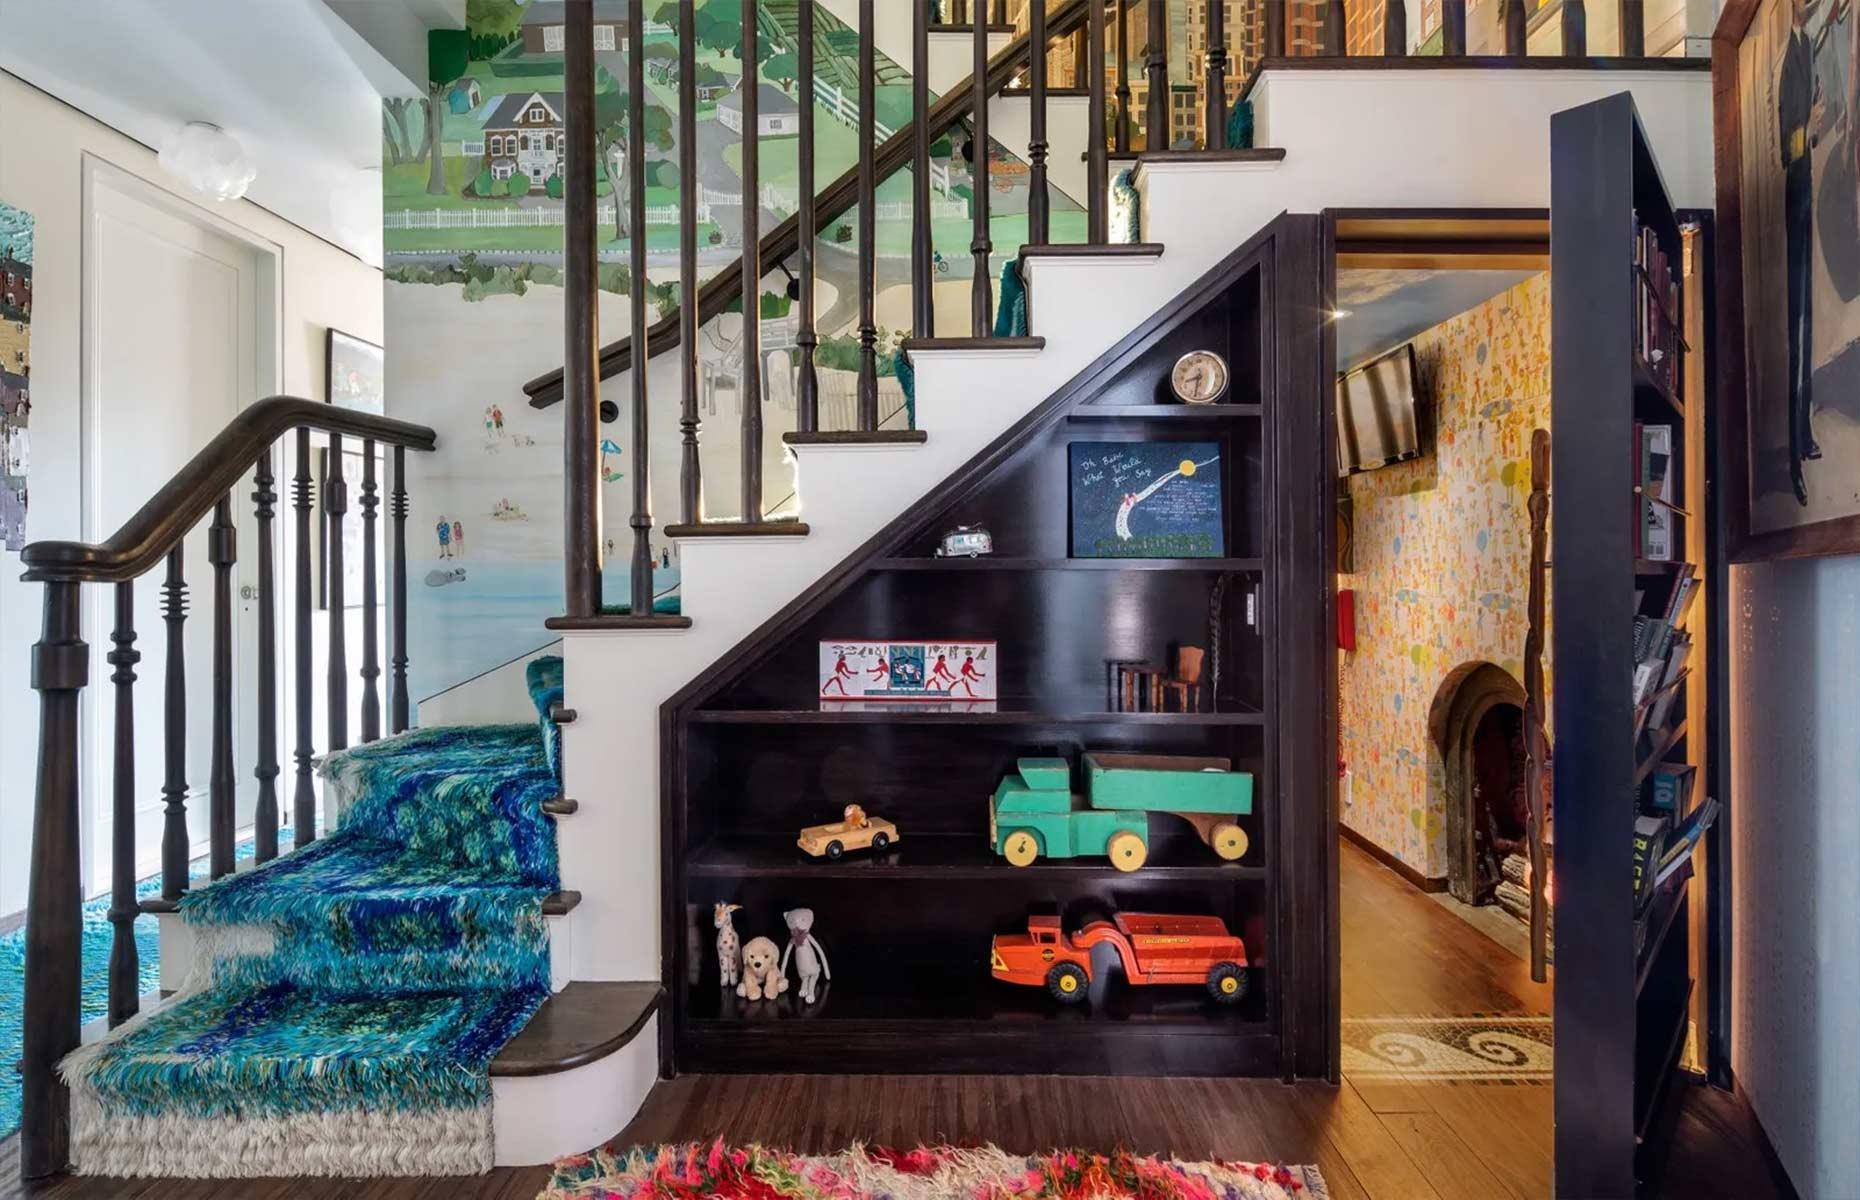 <p>In March 2021, American comedian and talk show host Jimmy Fallon placed his dreamy Manhattan home <a href="https://www.realtor.com/news/celebrity-real-estate/jimmy-fallon-lists-whimsical-nyc-apartment/">on the market</a> for a cool $15 million and it's every bit as fun and flamboyant as the man himself. Built in 1883, the Queen Anne-style property is packed with period features, one-of-a-kind antiques and truly exceptional interior design. Yet the six-bedroom home also harbors an array of extras, including a vintage-inspired pantry and a Wild West-style saloon. However, its most exciting feature can be found hiding under the stairs...</p>